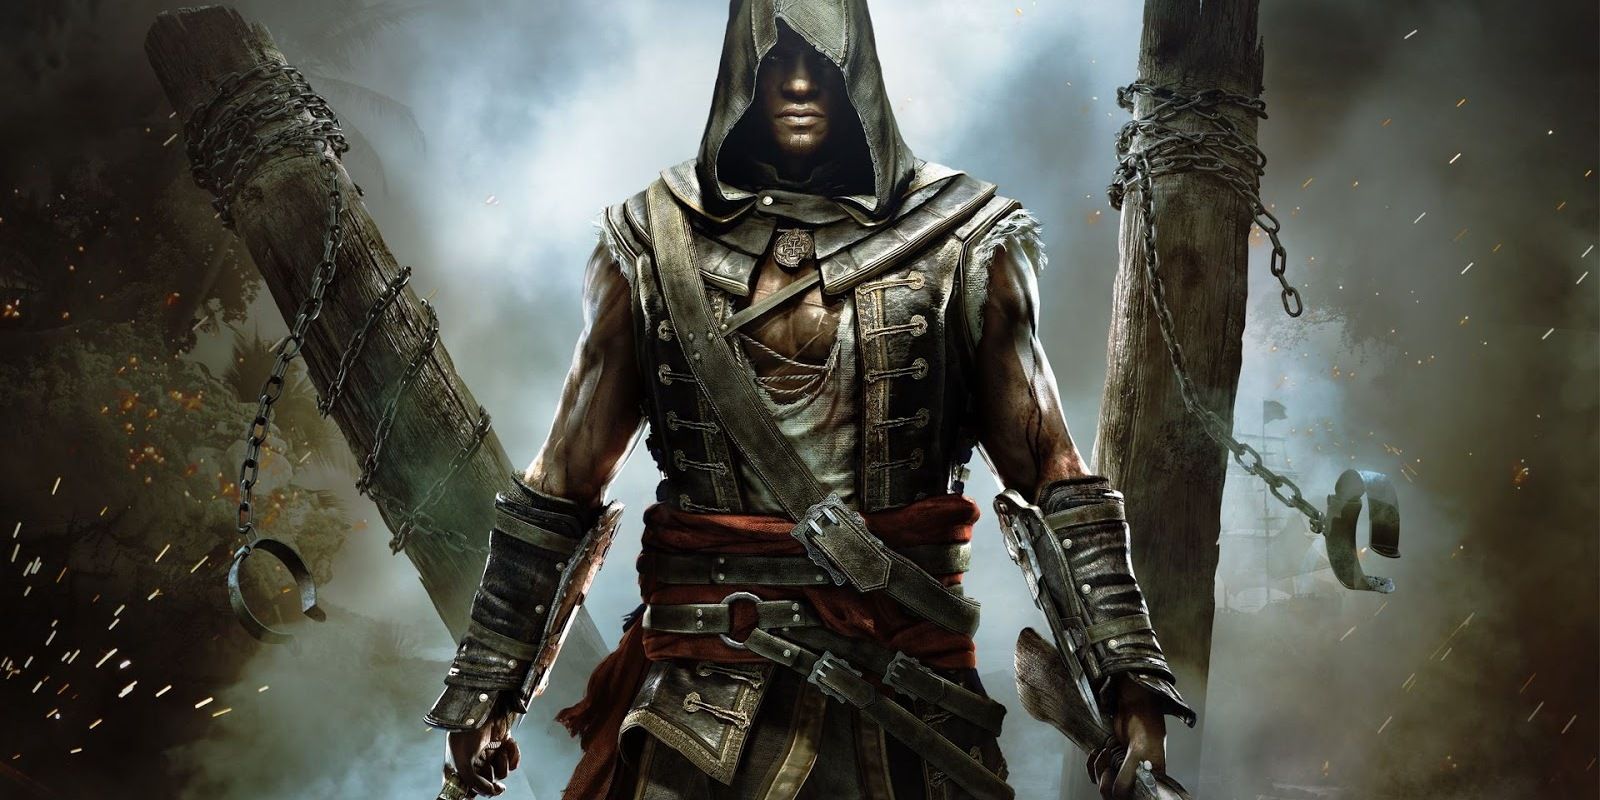 Adewale in Assassin's Creed Freedom Cry